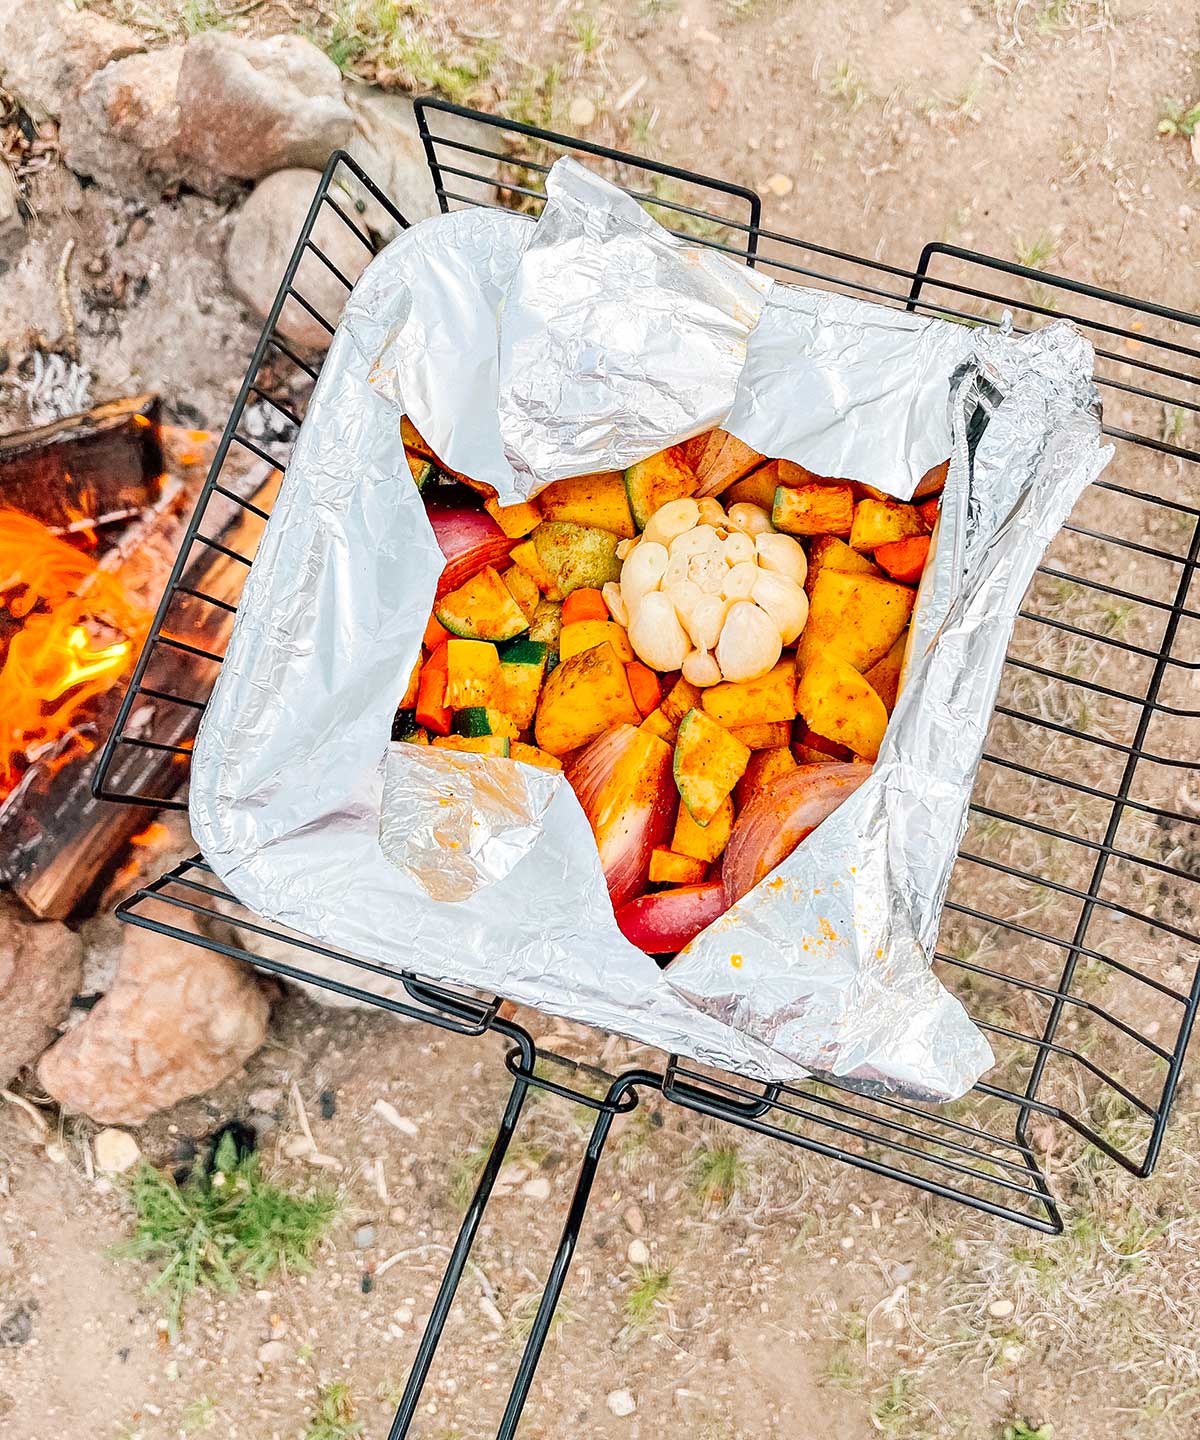 Cooking a tray of campfire roasted veggies over a campfire